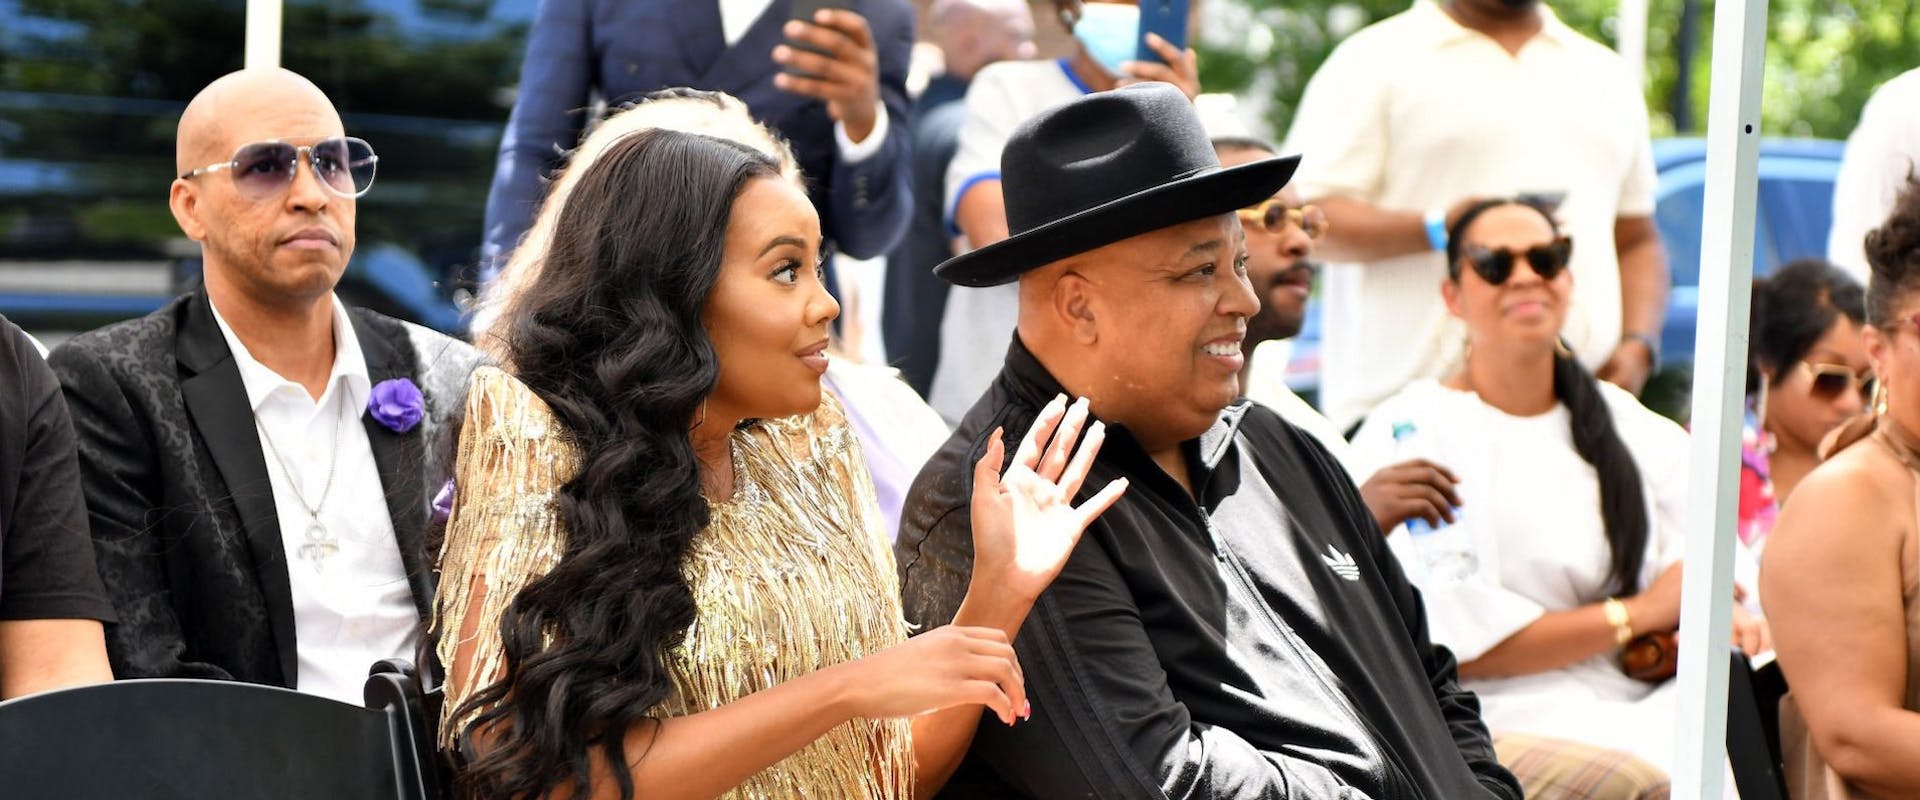 Angela Simmons and Rev Run attend the 2022 Black Music & Entertainment Walk Of Fame Induction Ceremony & Juneteenth Celebration at The Home Depot Backyard on June 18, 2022 in Atlanta, Georgia. (Photo by Derek White/Getty Images)